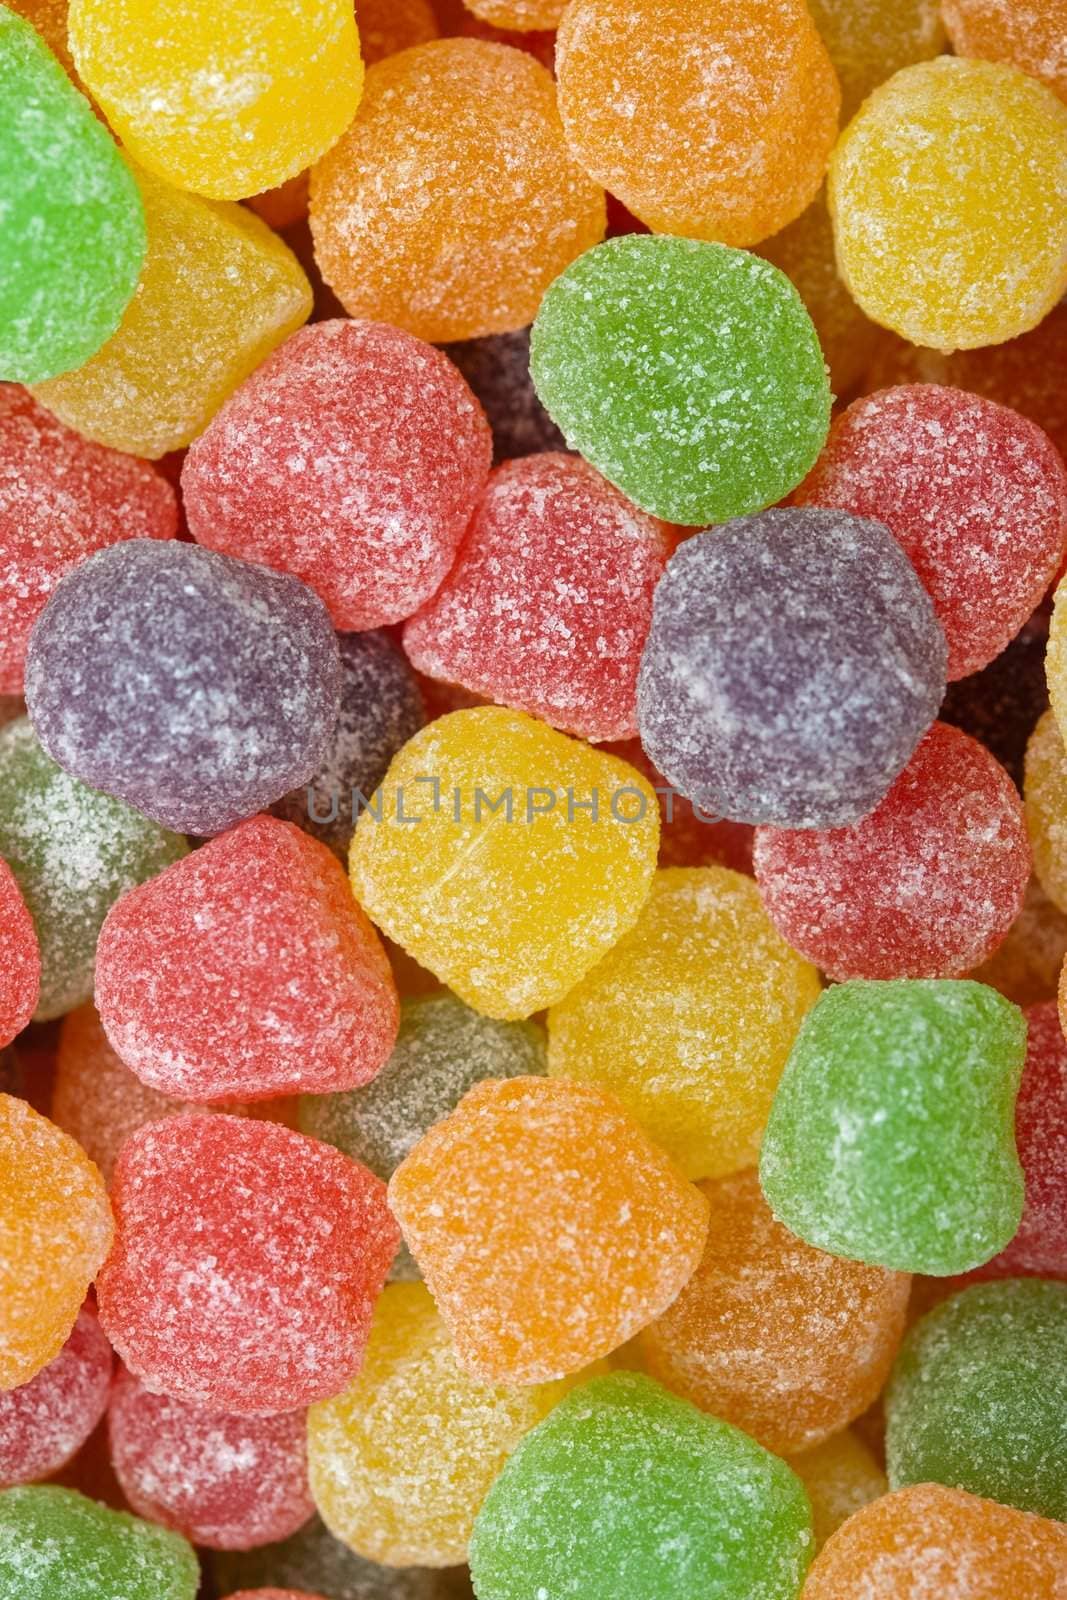 Coloful candy with sugar around it. Great for backgrounds.